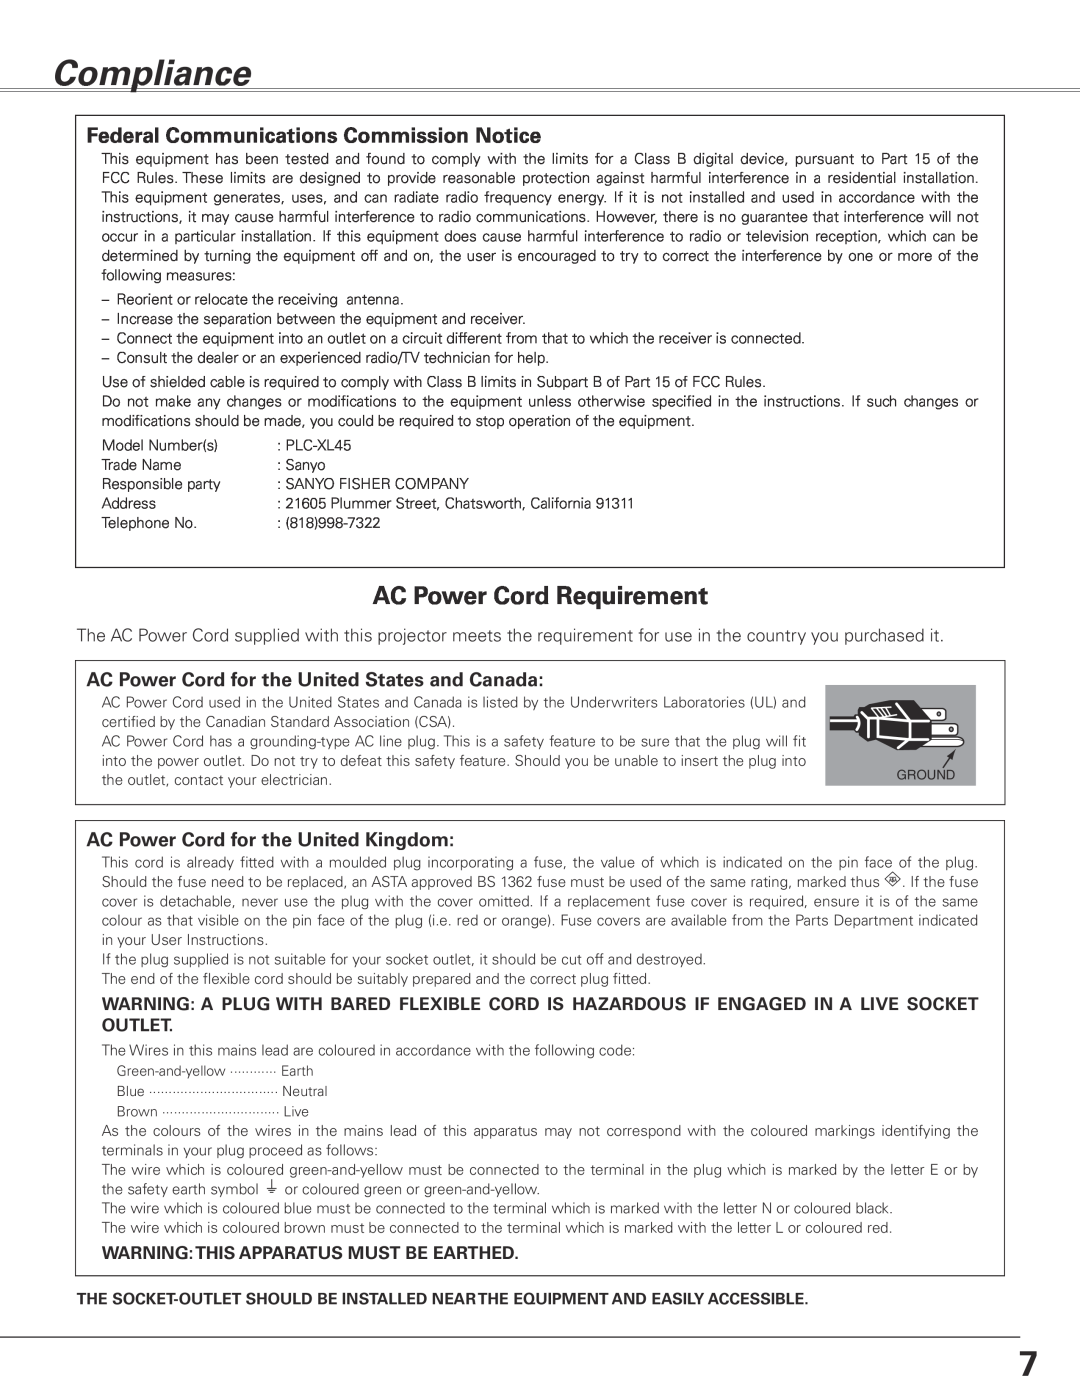 Sanyo PLC-XL45 owner manual Compliance, AC Power Cord Requirement, Federal Communications Commission Notice 